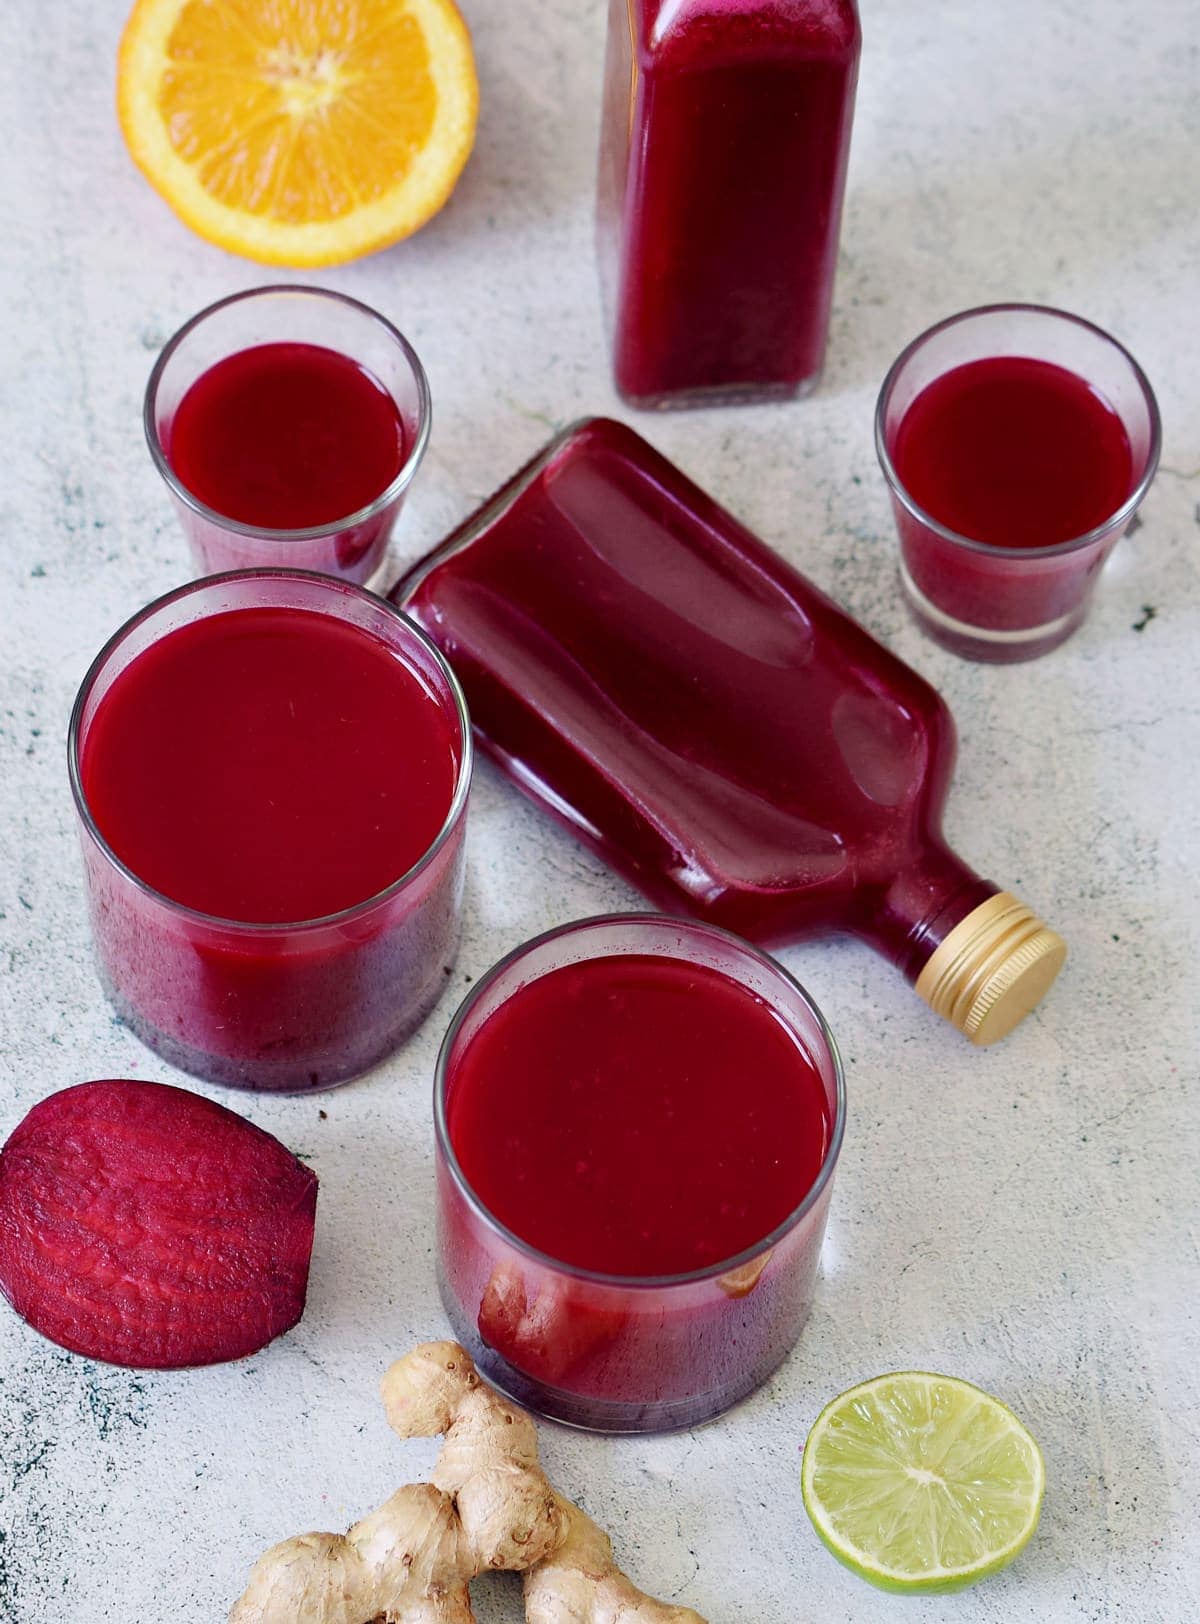 beetroot juice in jars and bottles from above